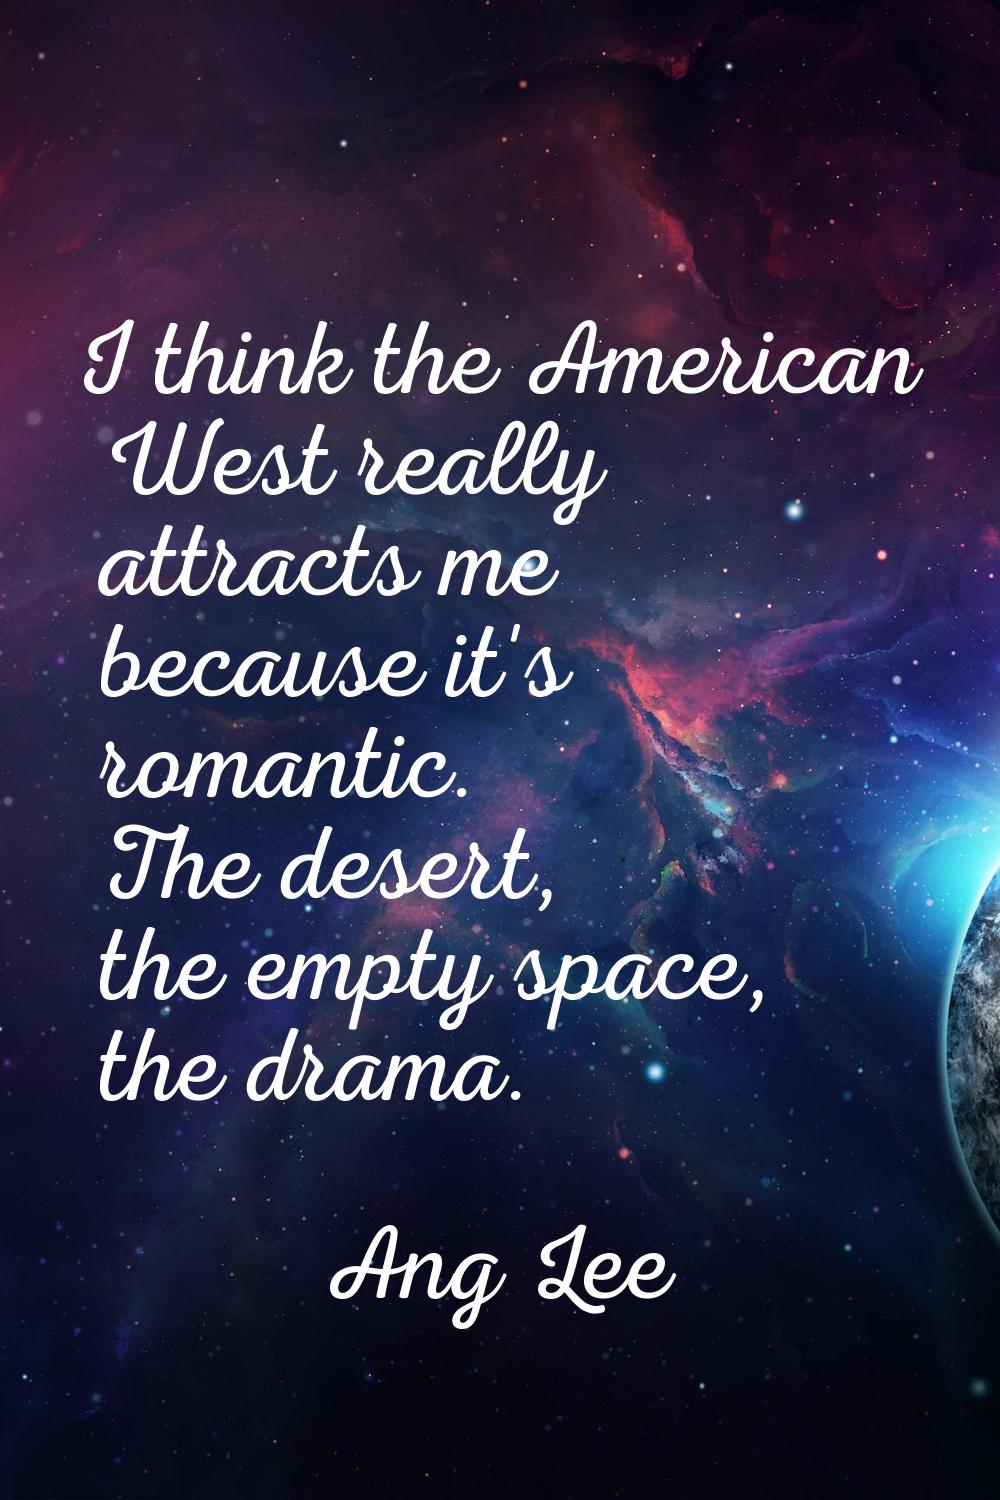 I think the American West really attracts me because it's romantic. The desert, the empty space, th